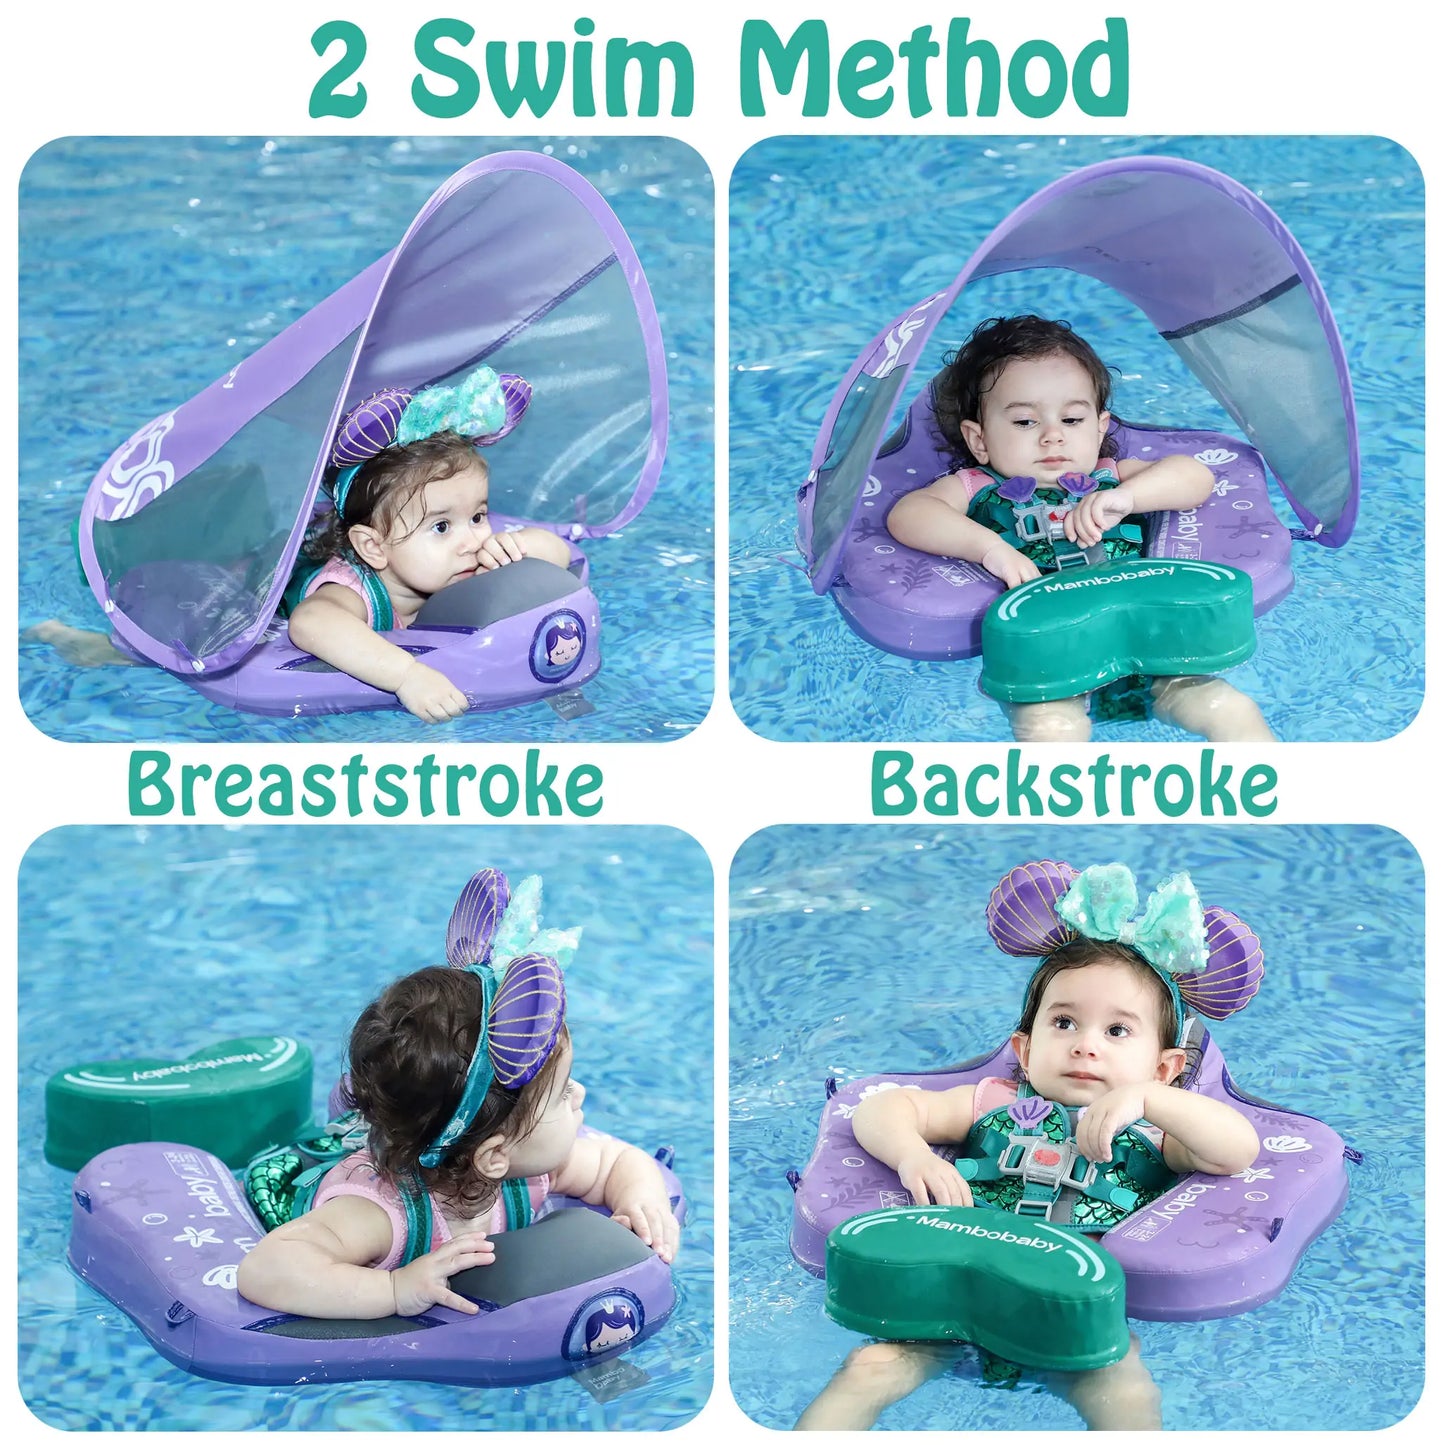 Mambobaby Air-Free Chest Type Floater with Canopy and Tail for 3-24 Months (Mermaid)